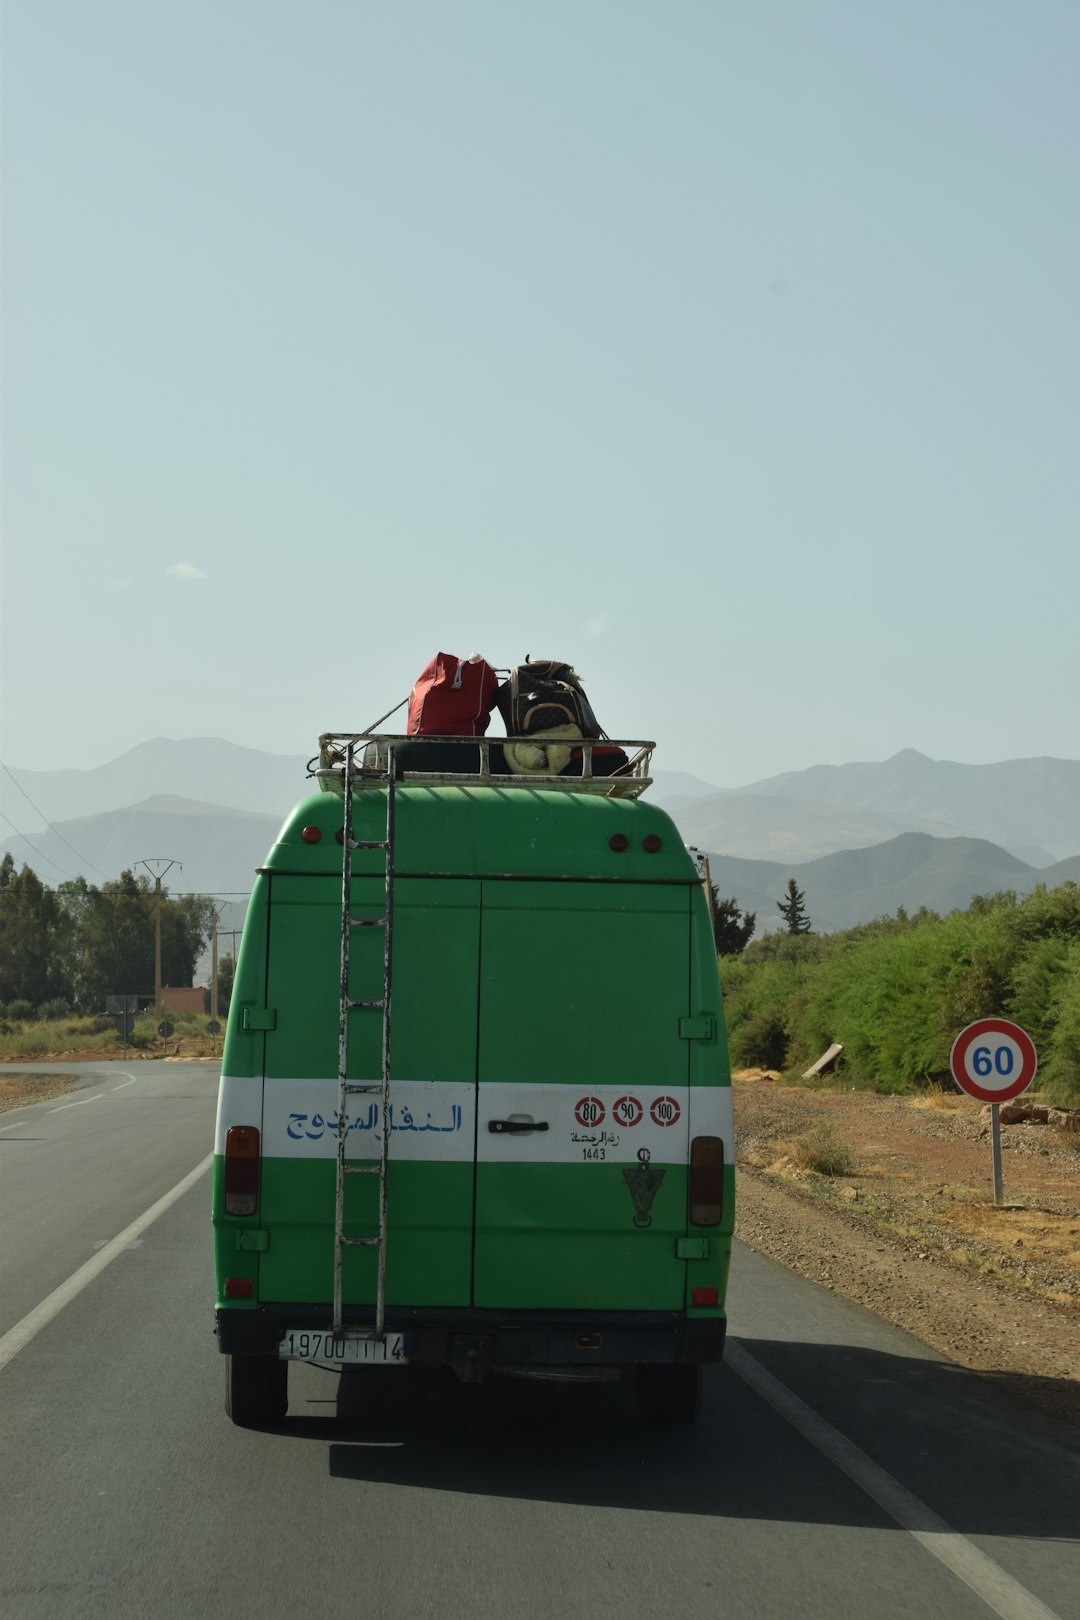 travelers stories about Road trip in Marrakech, Morocco